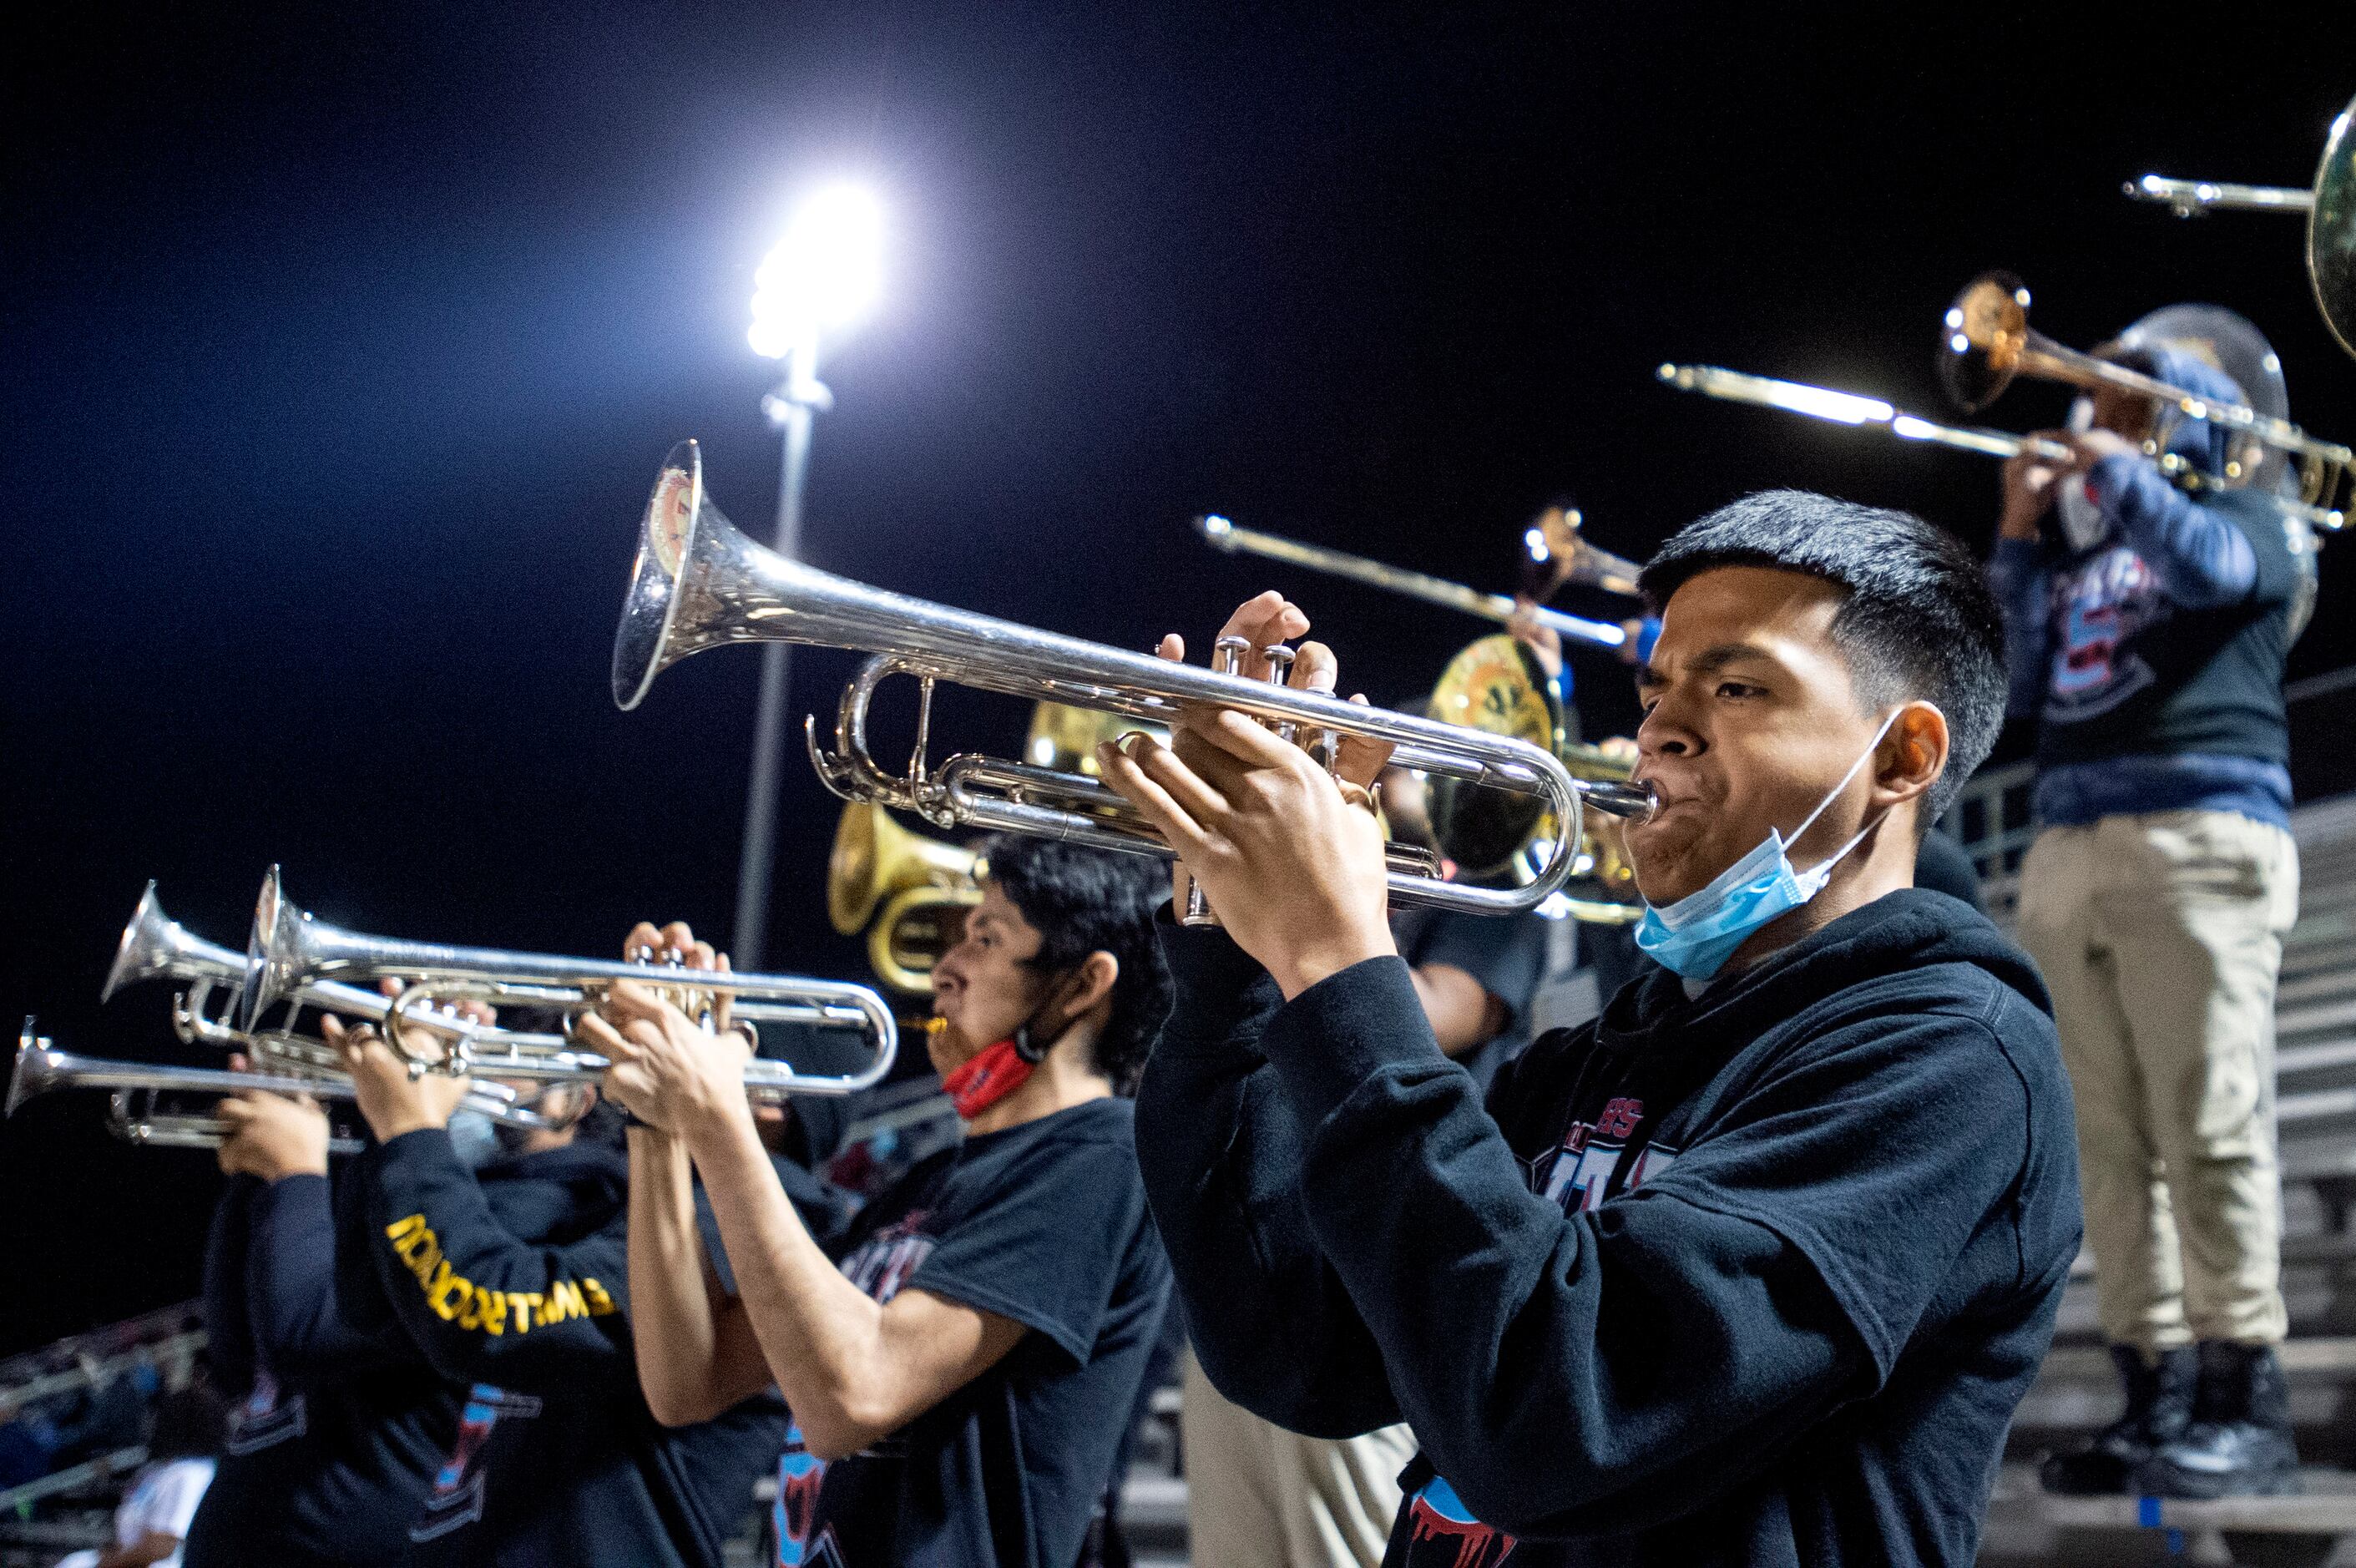 Carter senior Jose Martinez plays the trumpet during the first half of a high school...